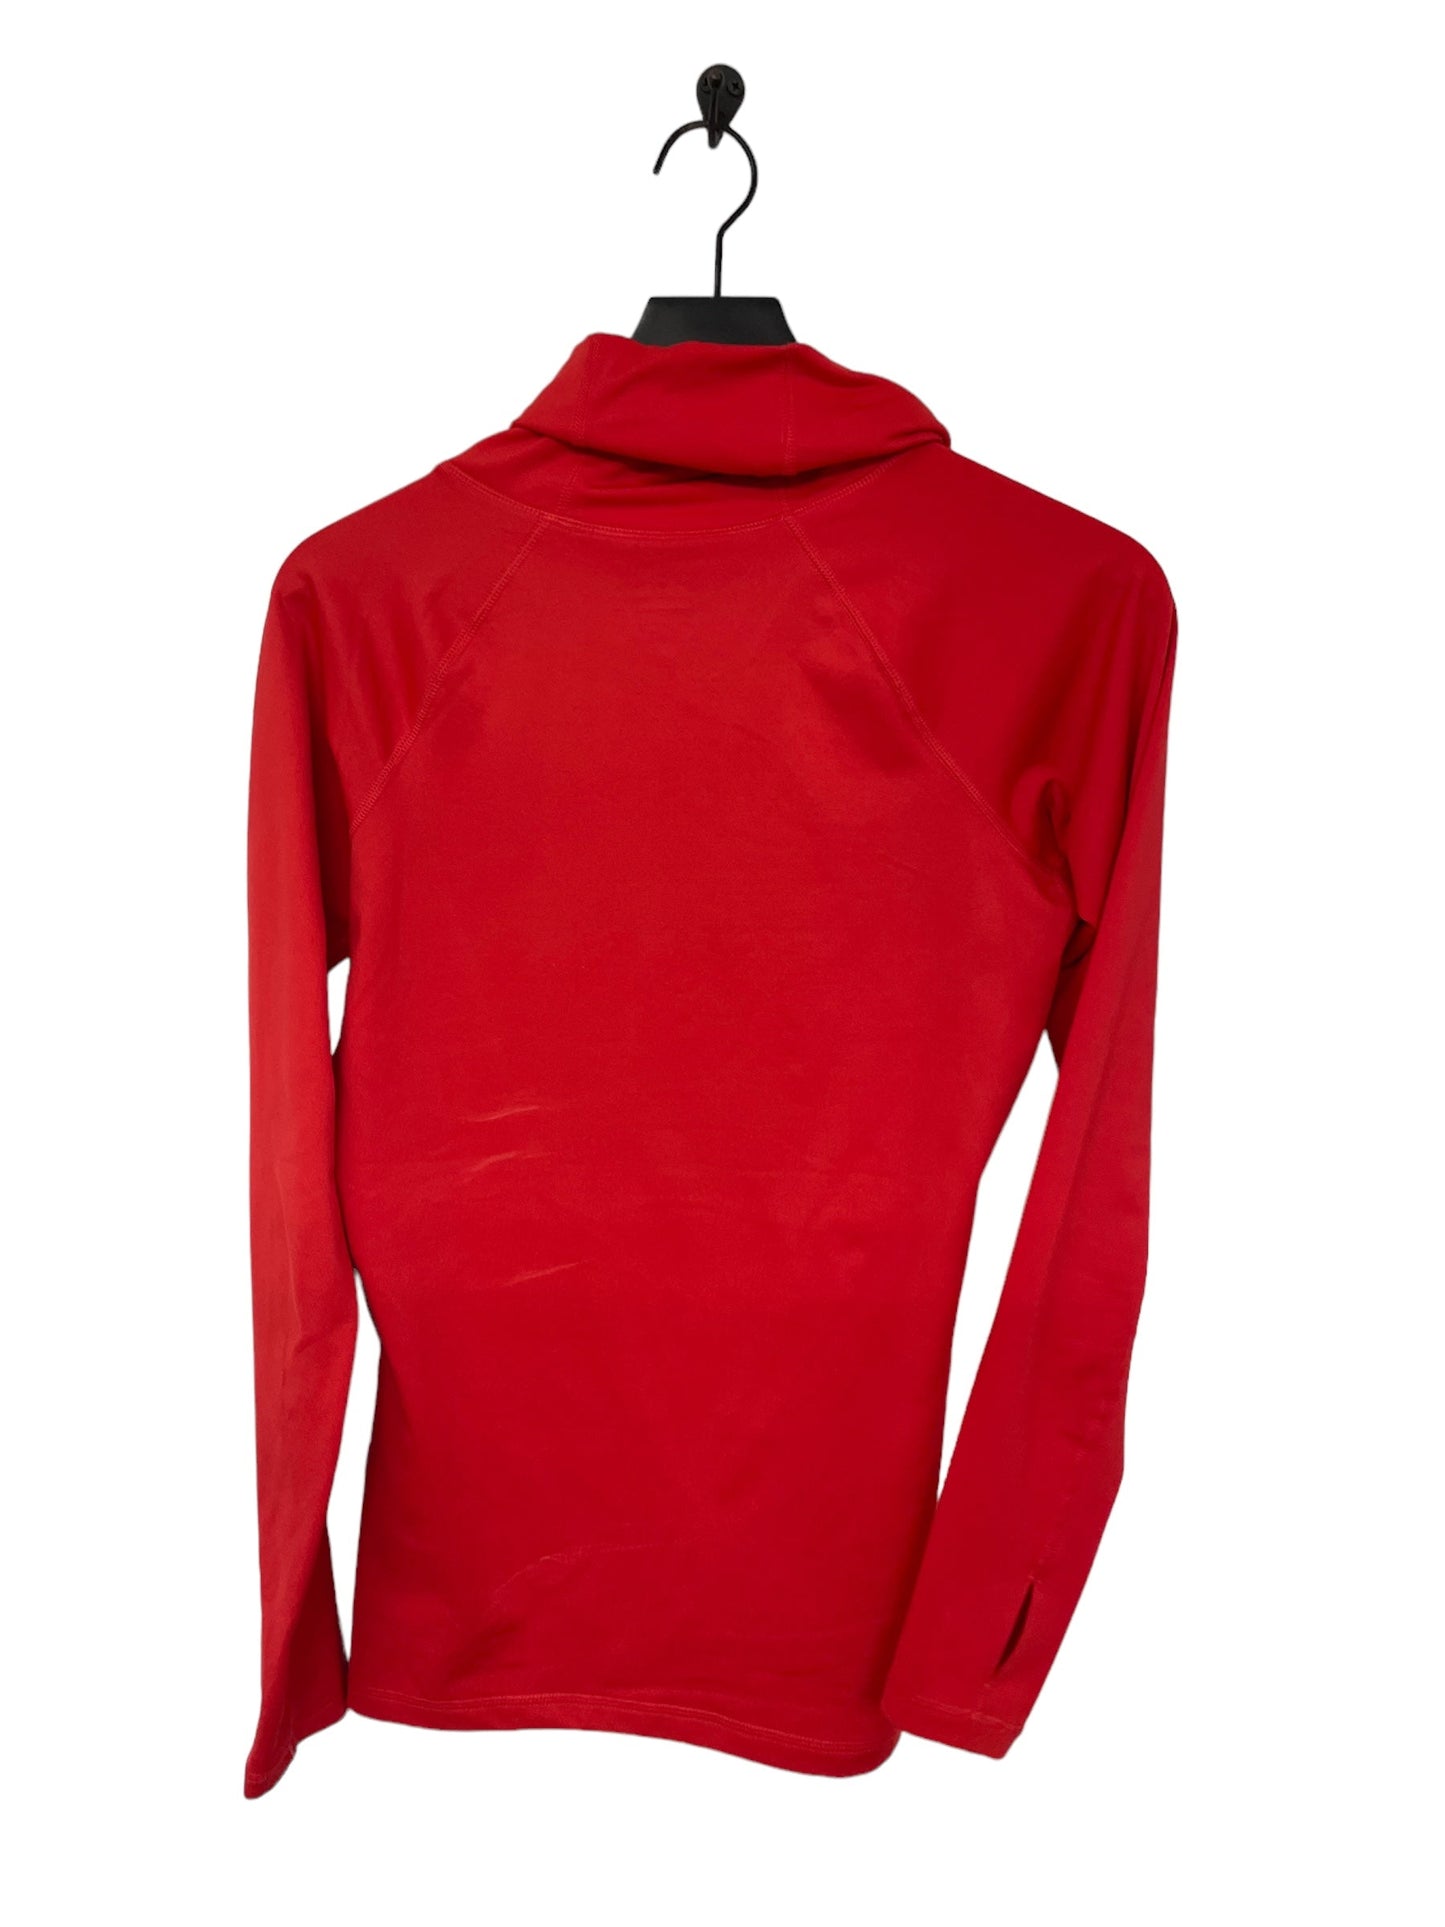 Red Athletic Top Long Sleeve Collar Nike, Size M